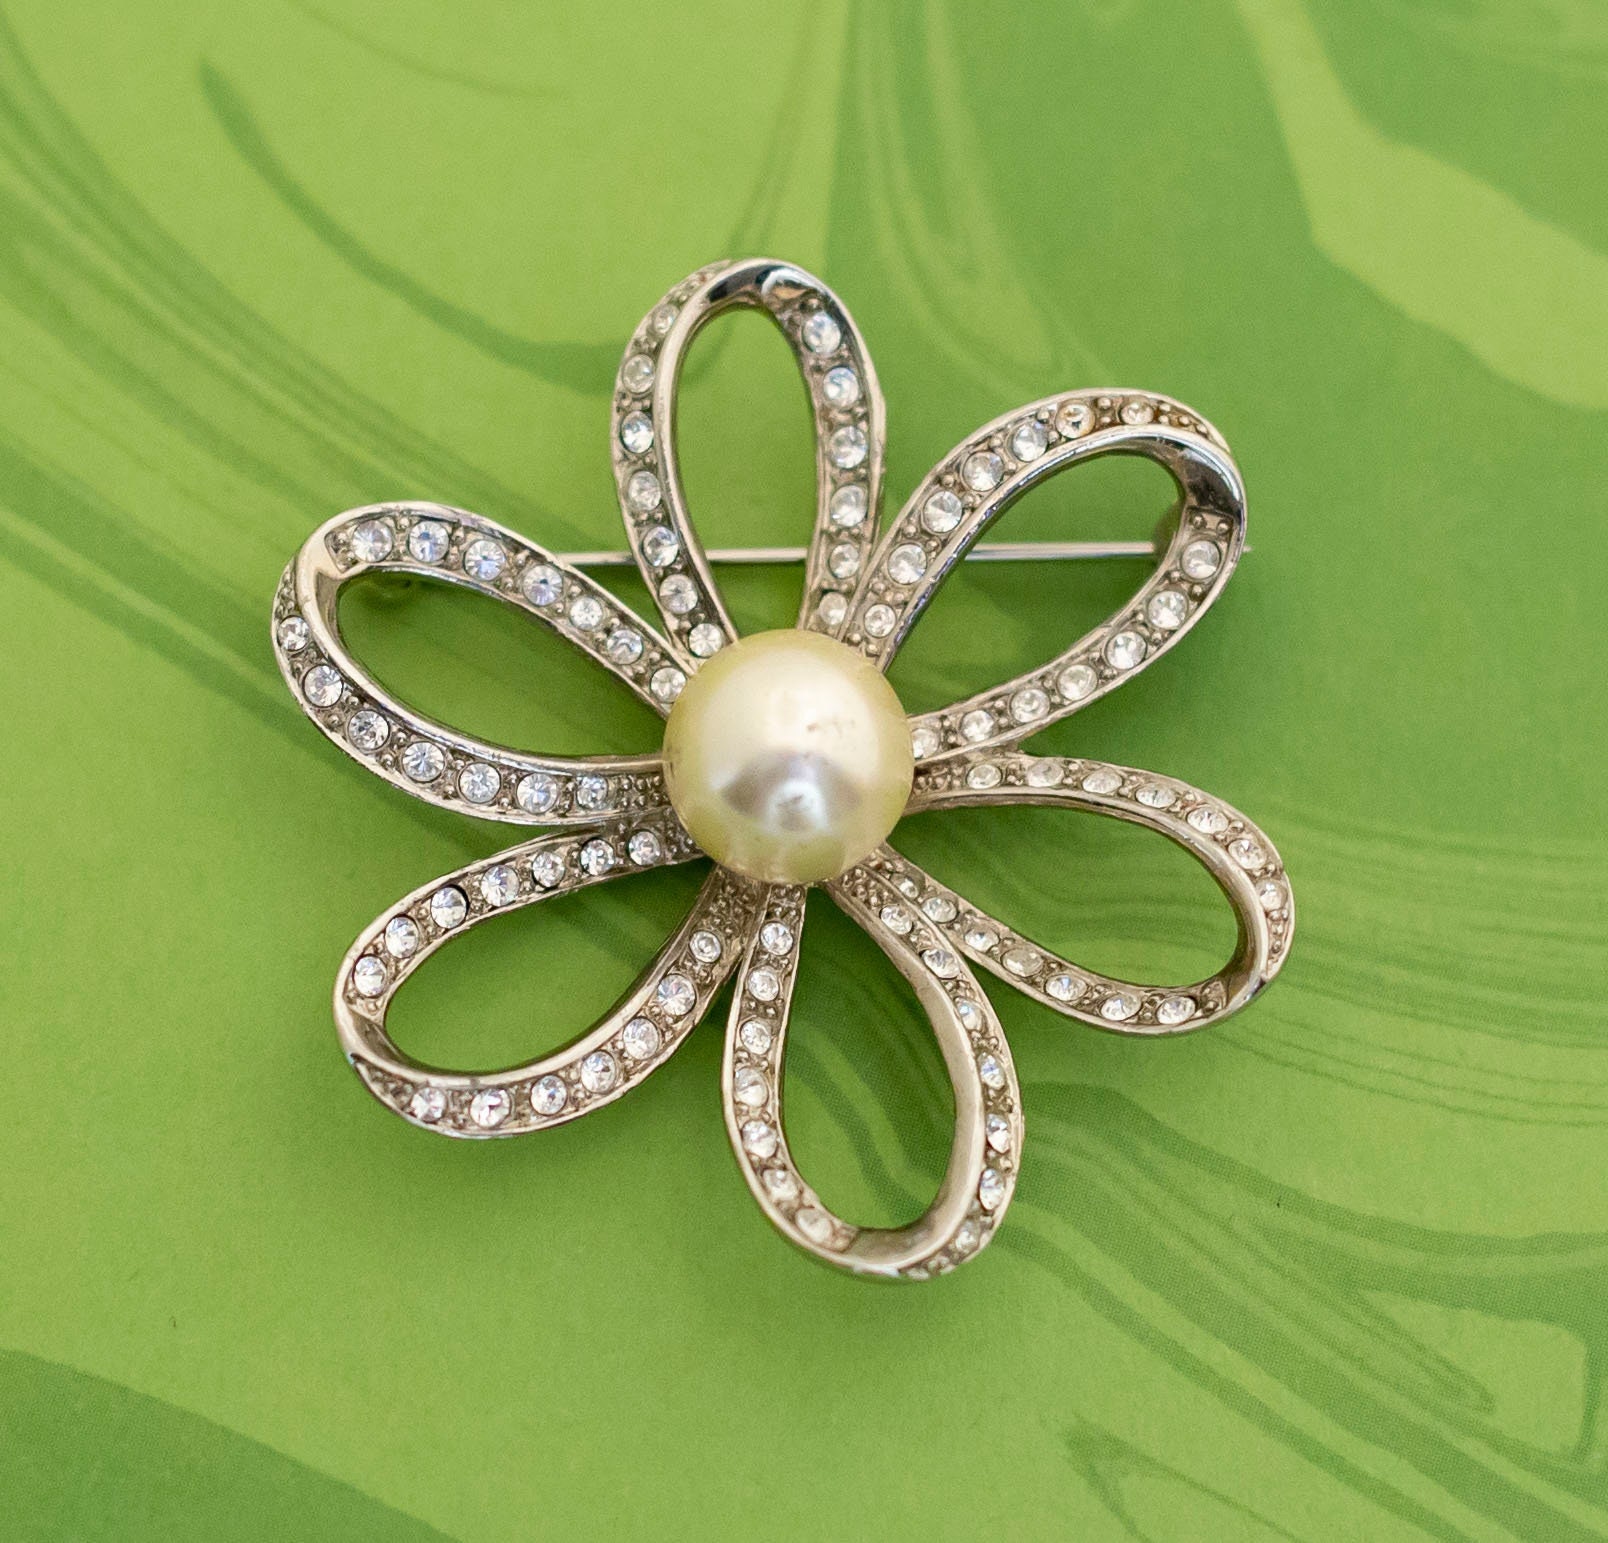 New Retro Hollow Pattern Big Pearl Brooches for Women Luxury